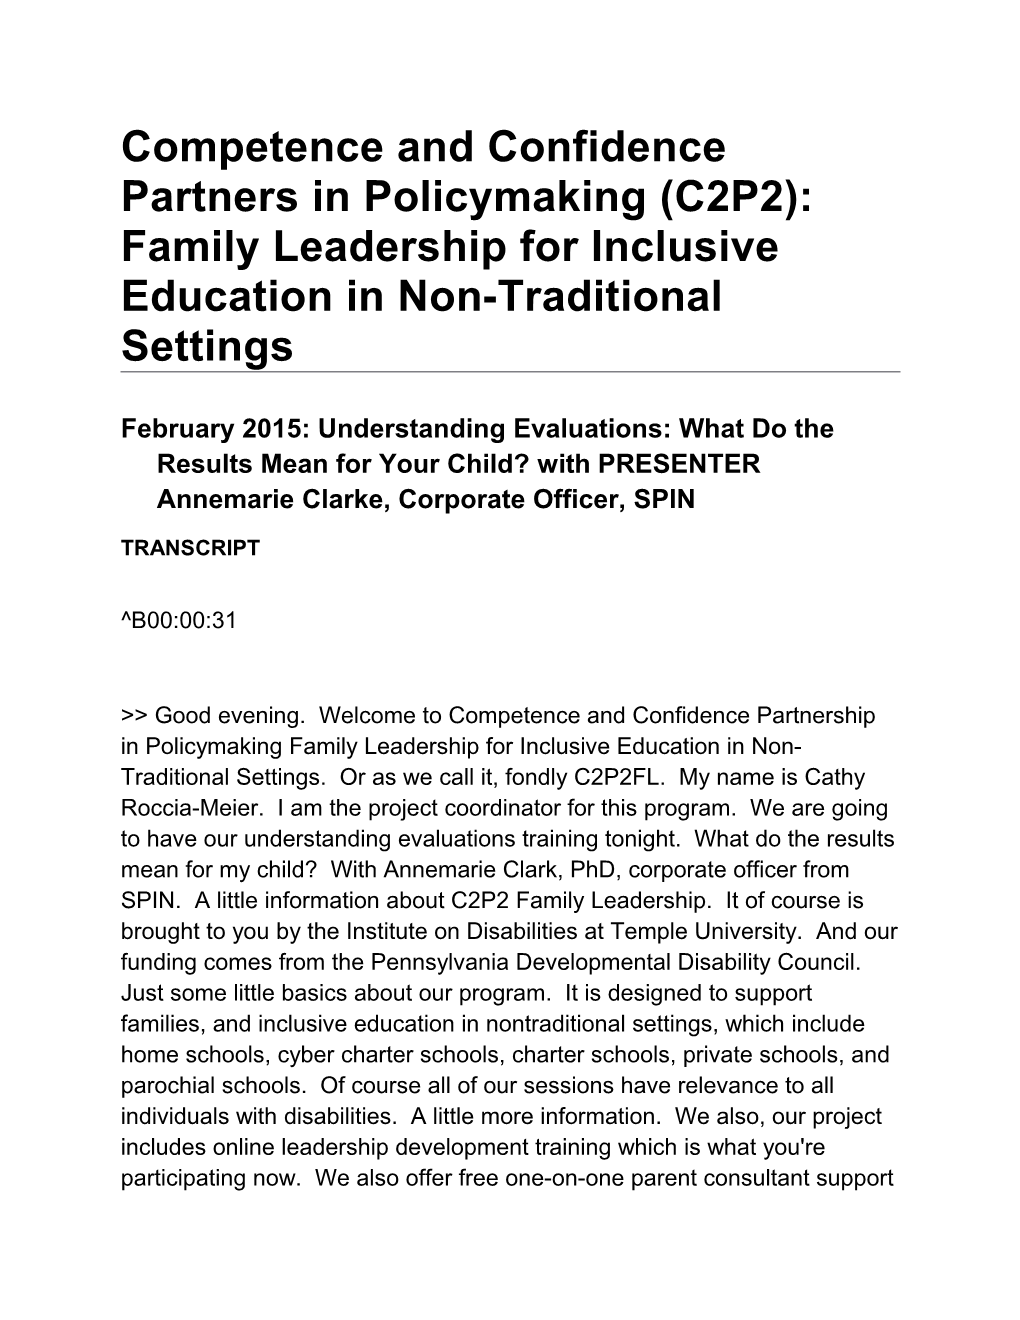 Competence and Confidence Partners in Policymaking (C2P2): Family Leadership for Inclusive